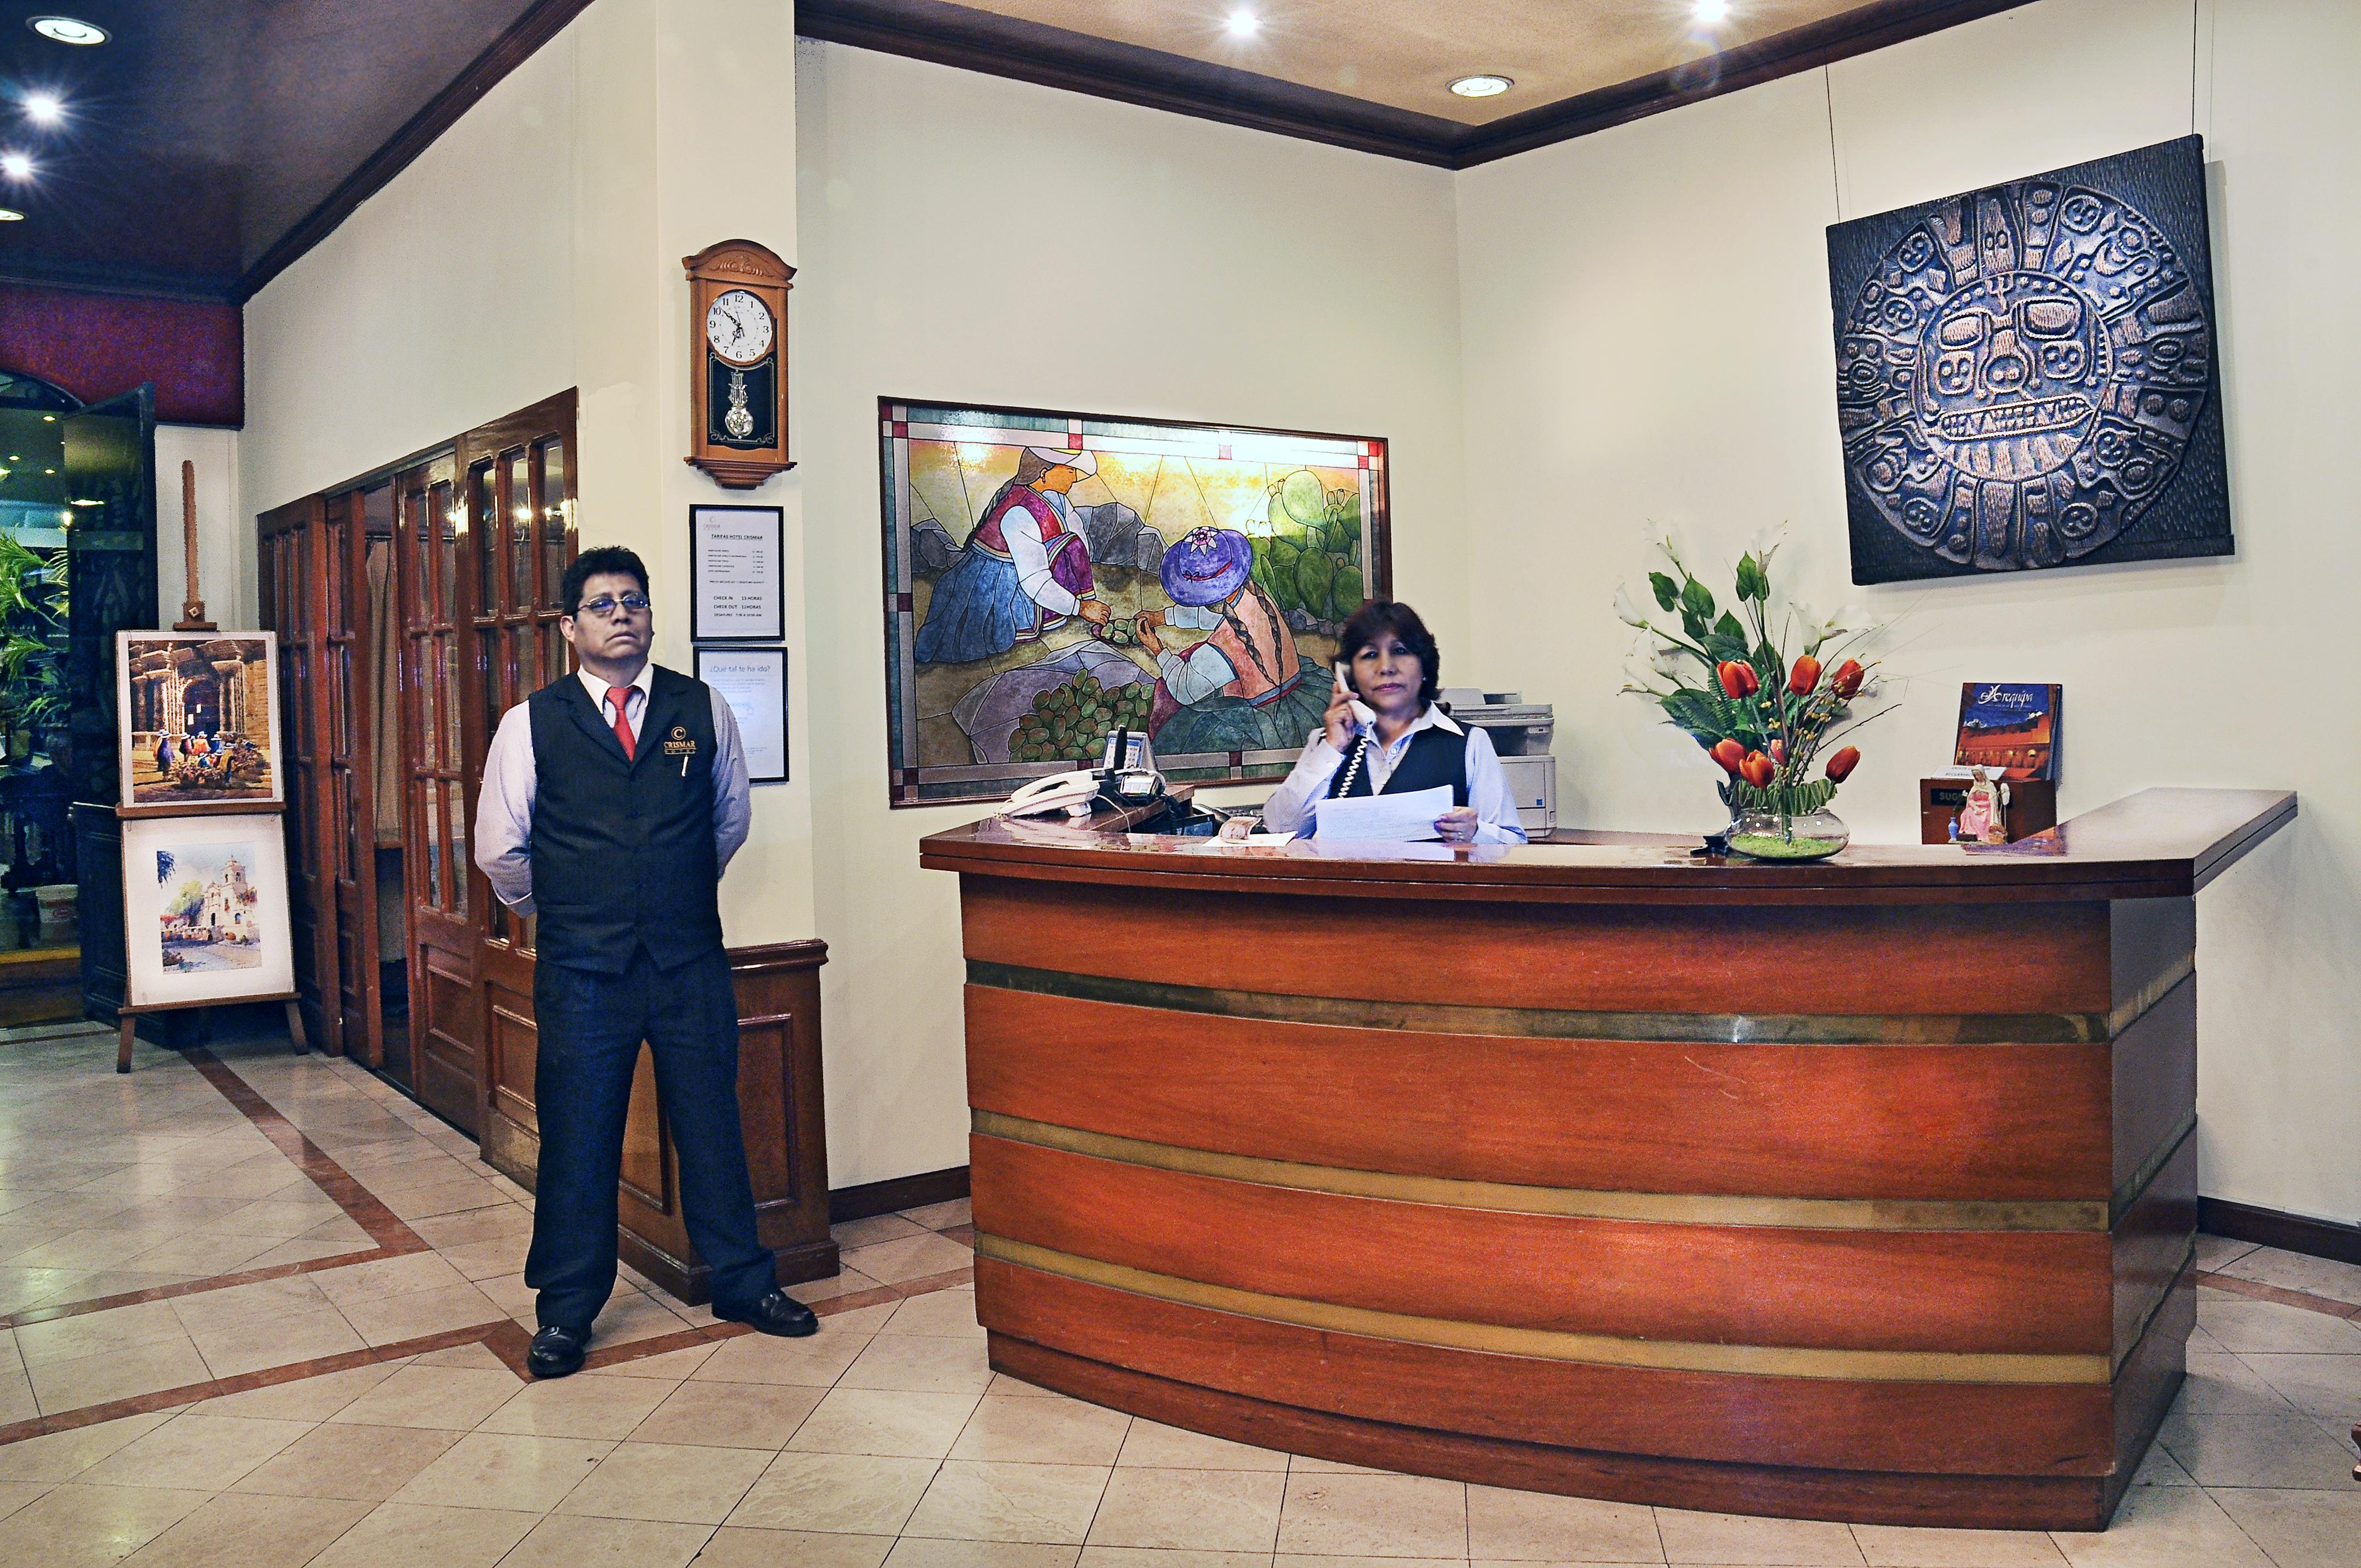 Crismar Experience By Xima Hotels Arequipa Buitenkant foto